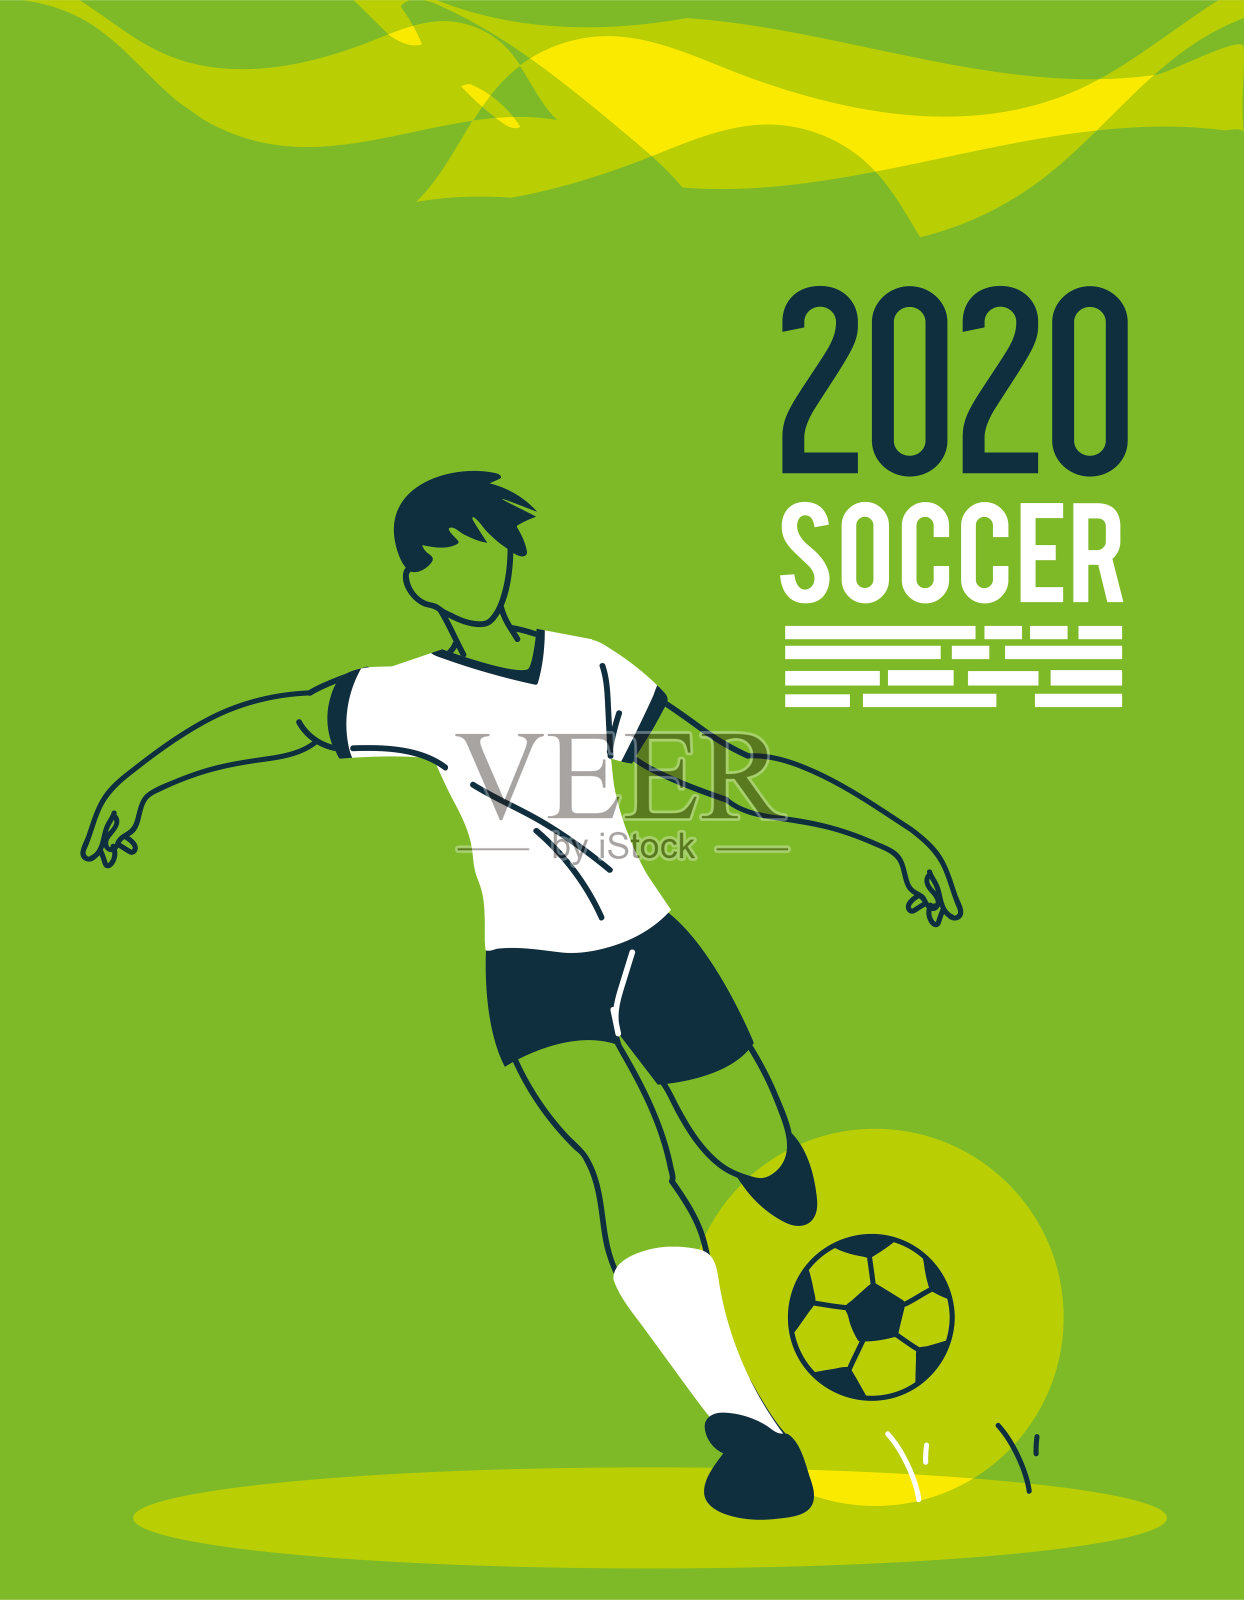 Soccer player man with ball vector design设计模板素材